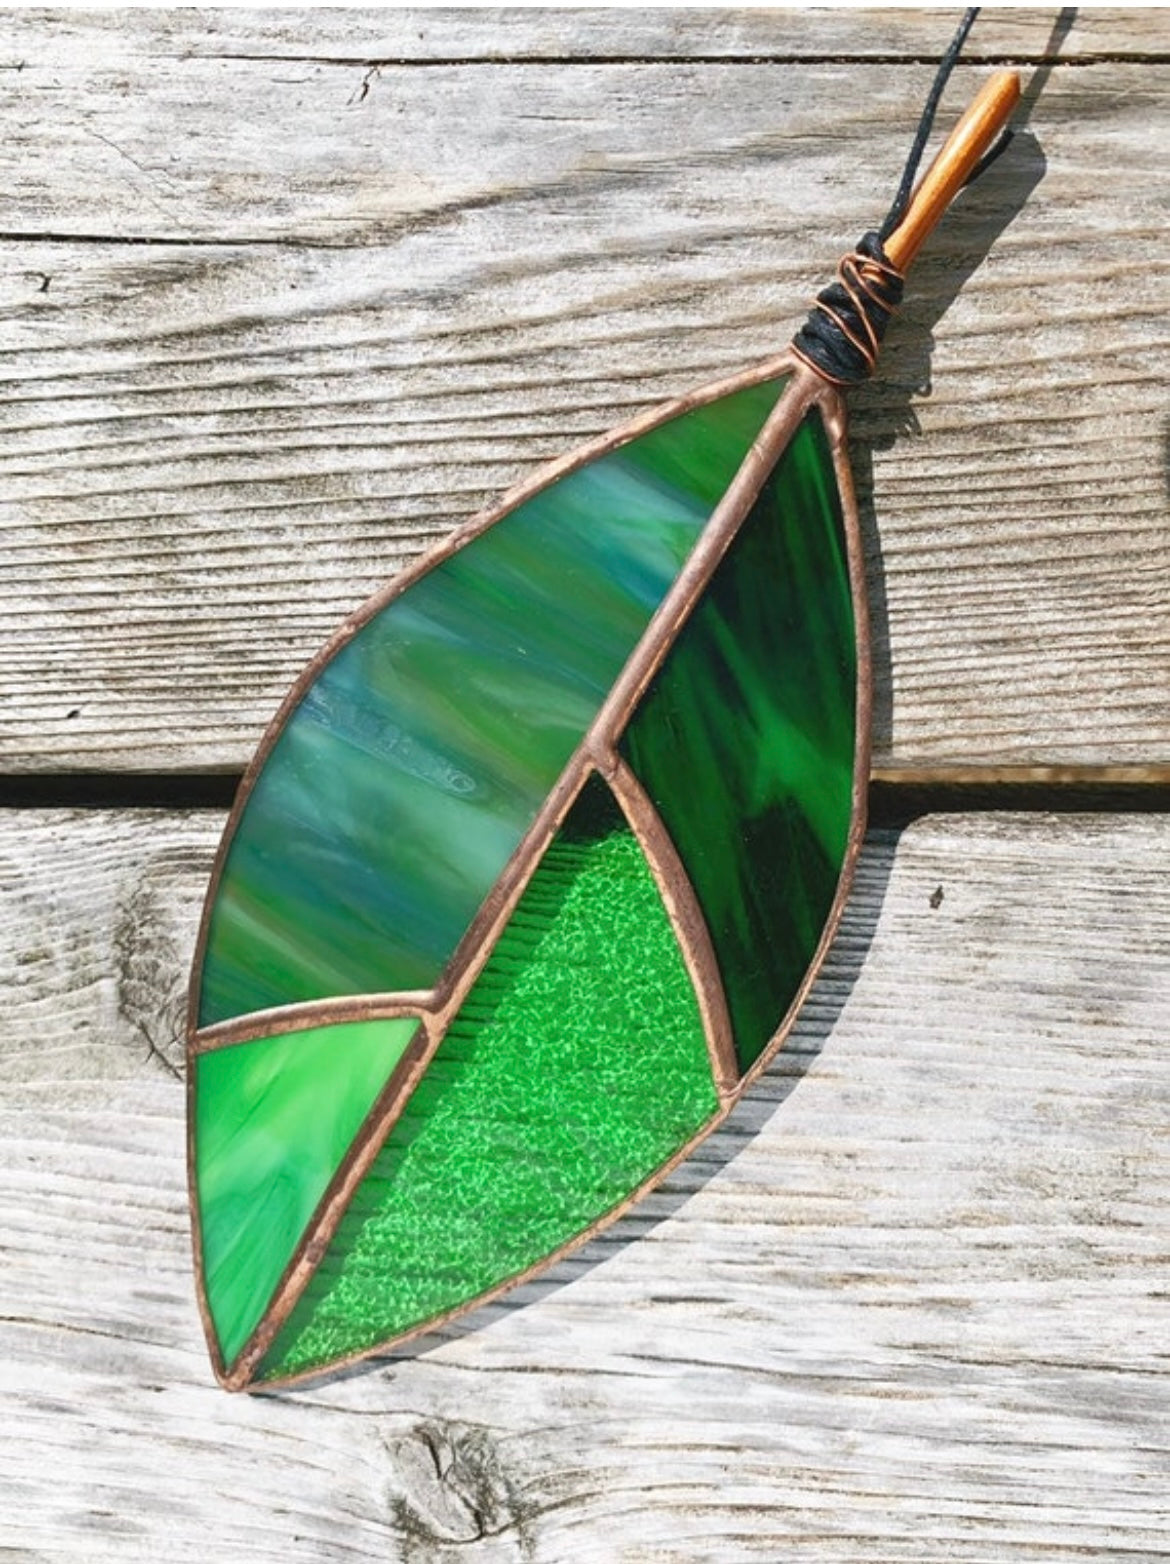 Beaverton Intro to Stained Glass Workshop at Moonflower's, Saturday March 23rd 10am-12pm